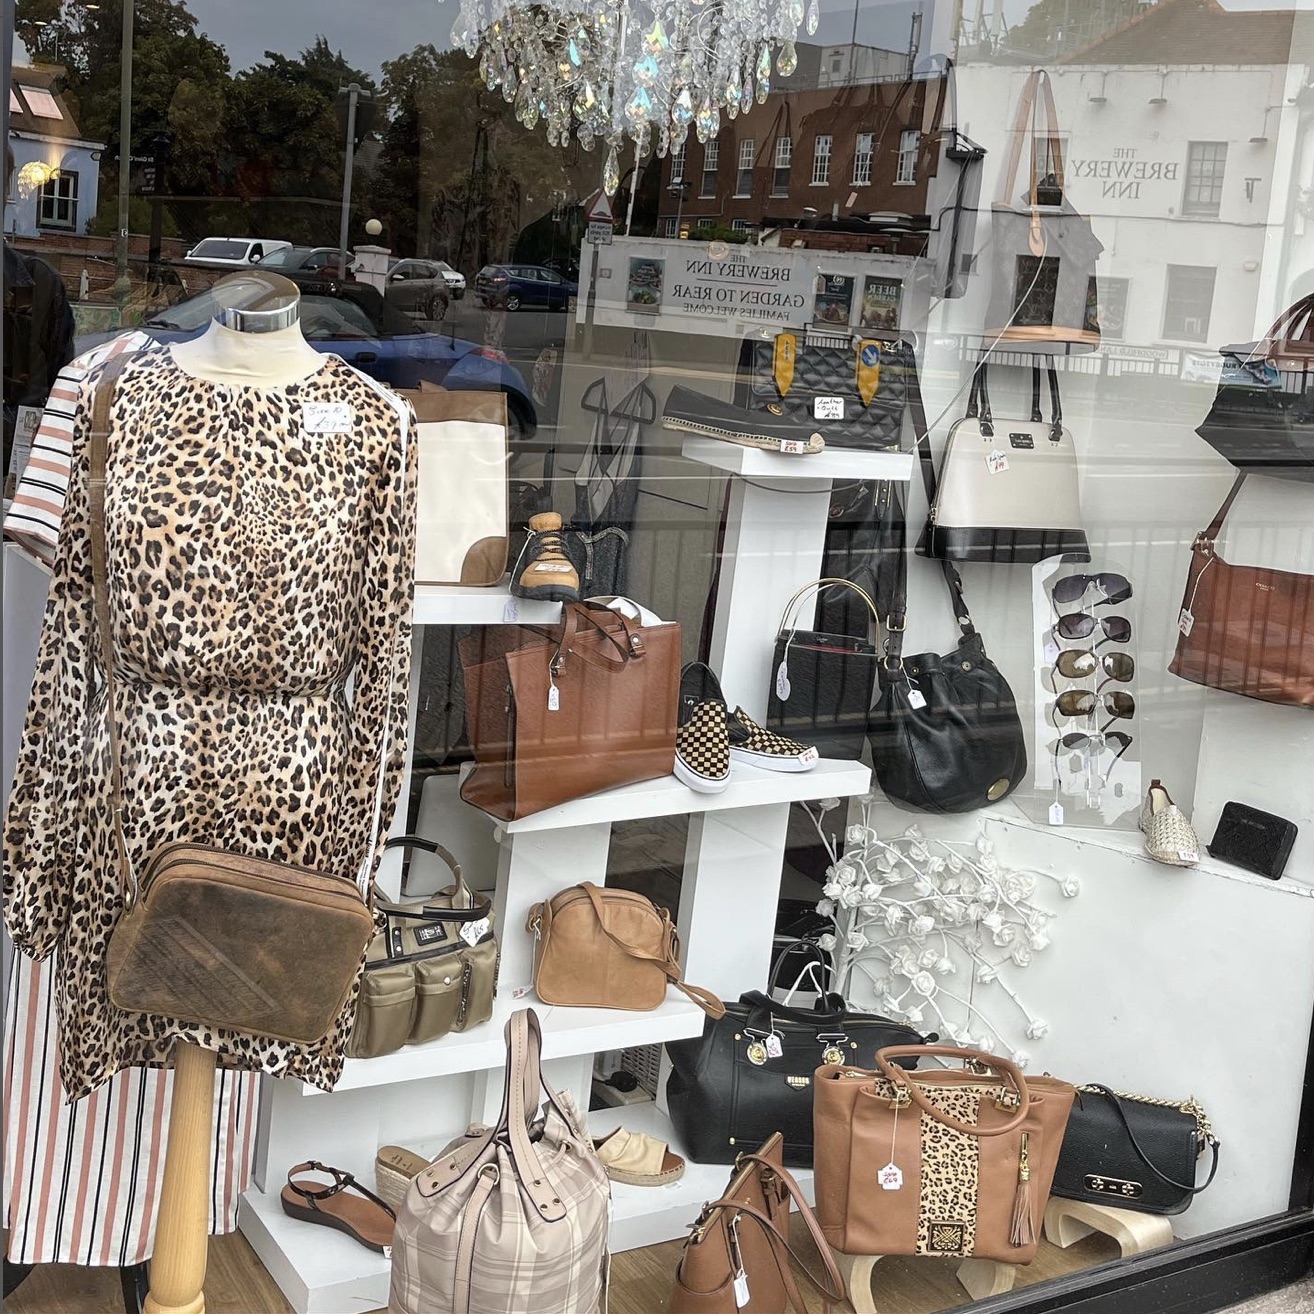 Fusspotts - Second Hand Designer Clothes Dress Agency in Oxted, Surrey  (Copy)